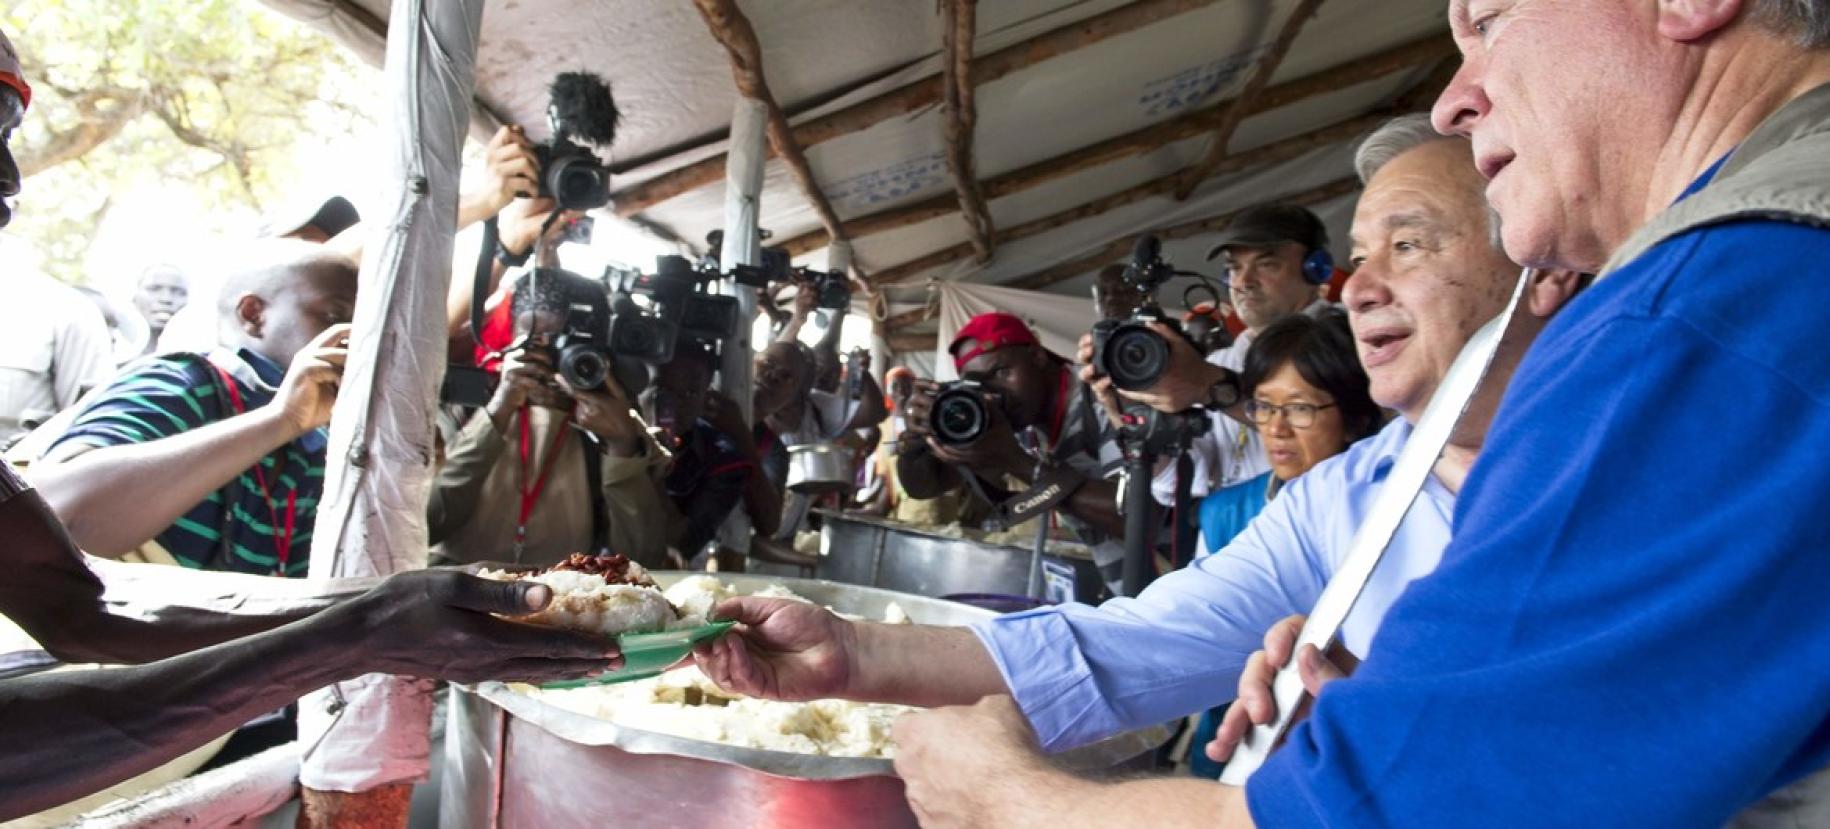 Secretary-General António Guterres (second from right) with David Beasley (right), WFP Executive Director, serving meals at the reception area for newly arrived refugees at the Imvepi settlement in Uganda.